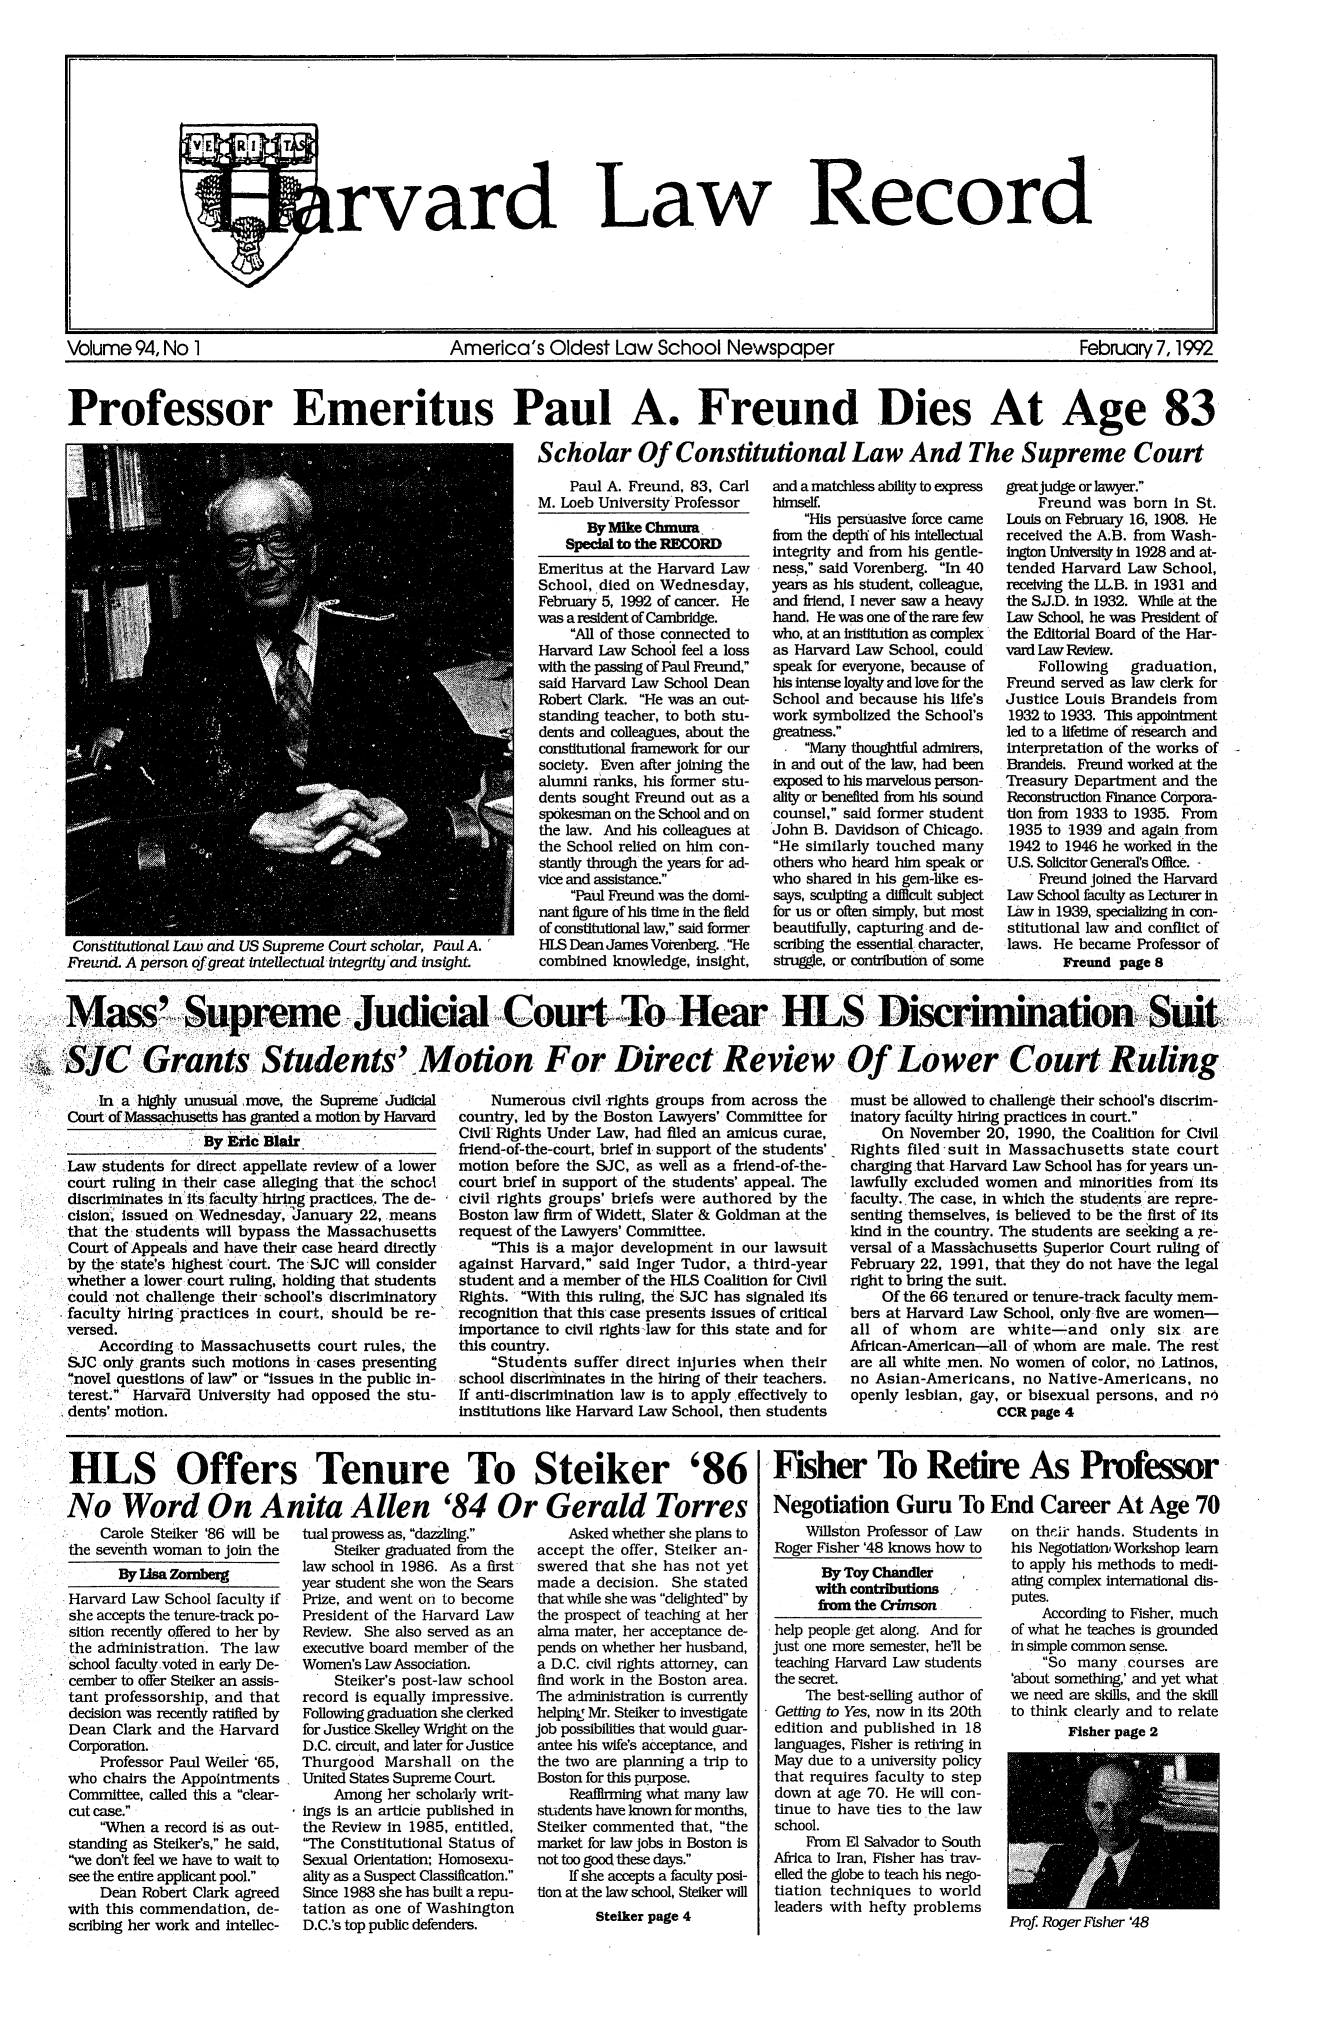 handle is hein.journals/hlrec94 and id is 1 raw text is: rvardLawRecordVolume 94, No 1             America's Oldest Law School Newspaper        February 7, 1992Professor Emeritus Paul A. Freund Dies At Age 83Scholar Of Constitutional Law And The Supreme CourtConstitutional Law and US Supreme Court scholar, Paul A.Freund. A person of great intellectual integrlty and insight.Paul A. Freund, 83, CarlM. Loeb University ProfessorBy Mike ChmumSpecial to the RECORDEmeritus at the Harvard LawSchool, died on Wednesday,February 5, 1992 of cancer. Hewas a resident of Cambridge.All of those connected toHarvard Law School feel a losswith the passing of Paul Freund,said Harvard Law School DeanRobert Clark. He was an out-standing teacher, to both stu-dents and colleagues, about theconstitutional framework for oursociety. Even after joining thealumni ranks, his forner stu-dents sought Freund out as aspokesman on the School and onthe law. And his colleagues atthe School relied on him con-stantly through the years for ad-vice and assistance.Paul Freund was the domi-nant figure of his time in the fieldof constitutional law, said formerHLS Dean James Votenbrg.. Hecombined knowledge, insight,and a matchless ability to expresshimself.His persuasive force camefrom the depth of his intellectualintegrity and from his gentle-ness, said Vorenberg. In 40years as his student, colleague,and friend, I never saw a heavyhand. He was one of the rare fewwho, at an institution as complexas Harvard Law School, couldspeak for everyone, because ofhis intense loyalty and love for theSchool and because his life'swork symbolized the School'sgreatness.Many thoughtful admirers,in and out of the law, had beenexposed to his marvelous person-ality or benefited from his soundcounsel, said former studentJohn B. Davidson of Chicago.He similarly touched manyothers who heard him speak orwho shared in his gem-like es-says, sculpting a difficult subjectfor us or often simply, but mostbeautifully, capturing and de-scribing the essential- character,struggle, or contribution of somegreat judge or lawyer.Freund was born in St.Louis on Februaiy 16, 1908. Hereceived the A.B. from Wash-ington University In 1928 and at-tended Harvard Law School,receiving the LL.B. in 1931 andthe S.J.D. in 1932. While at theLaw School, he was President ofthe Editorial Board of the Har-vard Law Review.Following graduation,Freund served as law clerk forJustice Louis Brandeis from1932 to 1933. This appointmentled to a lifetime of research andinterpretation of the works ofBrandeis. Freund worked at theTreasury Department and theReconstruction Finance Corpora-tion from 1933 to 1935. From1935 to '1939 and again .from1942 to 1946 he worked in theU.S. Solicitor General's Office. -Freund joined the HarvardLaw School faculty as Lecturer inLaw in 1939, specializIn con-stitutional law and conflict oflaws. He became Professor ofFreund page 8Mass~  upremeJuicial .Court>  oHa   L    iciiainSiSJC Grants StUdents-' Motion For Direct Review Of Lower Cour RulingGrn*'-..,ti                              Ofi'  Loo e a.  ' nIn ahighly unusual ,move, the Supreme JudicialCourtofMassahusetts has granted a motion by HarvardByfic Blair.          -Law students for direct appellate review of a lowercourt ruling in their case alleging that the schooldiscriminates in itsfaculty'hiring-practices,. The de-cision,' issued on Wednesday, JIa nuary 22, ,meansthat the. students will bypass the MassachusettsCourt of Appeals and have their case heard directlyby the state's highest court. The'SJC will considerwhether a lower court ruling, holding that studentscould -not challenge their-school's discriminatoryfaculty hiring practices in court, should be re-versed.According to Massachusetts court rules, theSJC only grants such motions in cases presentingnovel questions of law or issues in the public in-terest. Harvard University had opposed the stu-dents' motion.Numerous civil-rights groups from across thecountry, led by the Boston Lawyers' Committee forCivil Rights Under Law, had filed an amicus curae,friend-of-the-court, brief in support of the students'motion before the SJC, as well as a friend-of-the-court brief in support of the students' appeal. Thecivil rights groups' briefs were authored by theBoston law firm of Widett, Slater & Goldman at therequest of the Lawyers' Committee.This is a major development in our lawsuitagainst Harvard, said Inger Tudor, a third-yearstudent and a member of the HLS Coalition for CivilRights. With this ruling, the SJC has signaled Ifsrecognition that this case presents issues of criticalImportance to civil rights-law for this state and forthis country.Students suffer direct injuries when theirschool discriminates in the hiring of their teachers.If anti-discrimination law is to apply effectively toinstitutions like Harvard Law School, then studentsmust be allowed to challenge their school's discrim-inatory facilty hiring practices in court.On November 20, 1990, the Coalition for CivilRights filed -suit in Massachusetts state courtcharging that Harvard Law School has for years un-lawfully excluded women and minorities from Itsfaculty. The case, in which the students 'are repre-senting themselves, is believed to be the first of itskind in the country. The students are seeking a re-versal of a Masshchusetts §uperior Court ruling ofFebruary 22, 1991, that they do not have the legalright to bring the suit.Of the 66 tenared or tenure-track faculty mem-bers at Harvard Law School, only-five are women-all of whom are white-and only six areAfrican-American-all of whom are male. The restare all white men. No women of color, no Latinos,no Asian-Americans, no Native-Americans, noopenly lesbian, gay, or bisexual persons, and v6CCR page 4HLS Offers Tenure To Steiker '86No Word On Anita Allen '84 Or Gerald TorresCarole Steiker '86 will bethe seventh woman to join theByUsaZombergHarvard Law School faculty ifshe accepts the tenure-track po-sition recently offered to her bythe administration. The lawschool faculty voted in early De-cember to offer Stelker an assis-tant professorship, and thatdecision was recently ratified byDean Clark and the HarvardCorporation.Professor Paul Weiler '65,who chairs the AppointmentsCommittee, called this a clear-cut case.When a record is as out-standing as Steiker's, he said,we don't feel we have to wait tosee the entire applicant pool.Dean Robert Clark agreedwith this commendation, de-scribing her work and intellec-tual prowess as, dazliiig.Steiker graduated from thelaw school in 1986. As a firstyear student she won the SearsPrize, and went on to becomePresident of the Harvard LawReview. She also served as anexecutive board member of theWomen's Law Association.Steiker's post-law schoolrecord is equally impressive.Following graduation she clerkedfor Justice.Skelley Wrigit on theD.C. circuit, and later for JusticeThurgood Marshall on theUnited States Supreme Court.Among her scholarly writ-ings is an articie published inthe Review in 1985, entitled,'The Constitutional Status ofSexual Orientation; Homosexu-ality as a Suspect Classification.Since 1988 she has built a repu-tation as one of WashingtonD.C.'s top public defenders.Asked whether she plans toaccept the offer, Stelker an-swered that she has not yetmade a decision. She statedthat while she was delighted bythe prospect of teaching at heralma mater, her acceptance de-pends on whether her husband,a D.C. civil rights attorney, canfind work in the Boston area.The administration is currentlyhelping Mr. Steiker to investigatejob possibilities that would guar-antee his wife's acceptance, andthe two are planning a trip toBoston for this purpose.Reafflnlng what many lawstudents have known for months,Steiker commented that, themarket for law jobs in Boston isnot too good these days.If she accepts a faculty posi-tion at the law school, Steiker willSteiker page 4Fisher To Retire As ProfessorNegotiation Guru ToWillston Professor of LawRoger Fisher '48 knows how toBy Toy Chandlerwith contributionsfrm the Crimsonhelp people get along. And forjust one more semester, hell beteaching Harvard Law studentsthe secret.The best-selling author ofGettipg to Yes, now in its 20thedition and published in 18languages, Fisher is retiring inMay due to a university policythat requires faculty to stepdown at age 70. He will con-tinue to have ties to the lawschool.From El Salvador to SouthAfrica to Iran, Fisher has trav-elled the globe to teach his nego-tiation techniques to worldleaders with hefty problemsEnd Career At Age 70on theric hands. Students inhis Negotiation, Workshop learnto apply his methods to medi-ating complex international dis-putes.According to Fisher, muchof what he teaches is groundedin simple common sense.So many courses are'about something,' and yet whatwe need are skills, and the skillto think clearly and to relateFisher page 2Prof. Roger Fisher '48